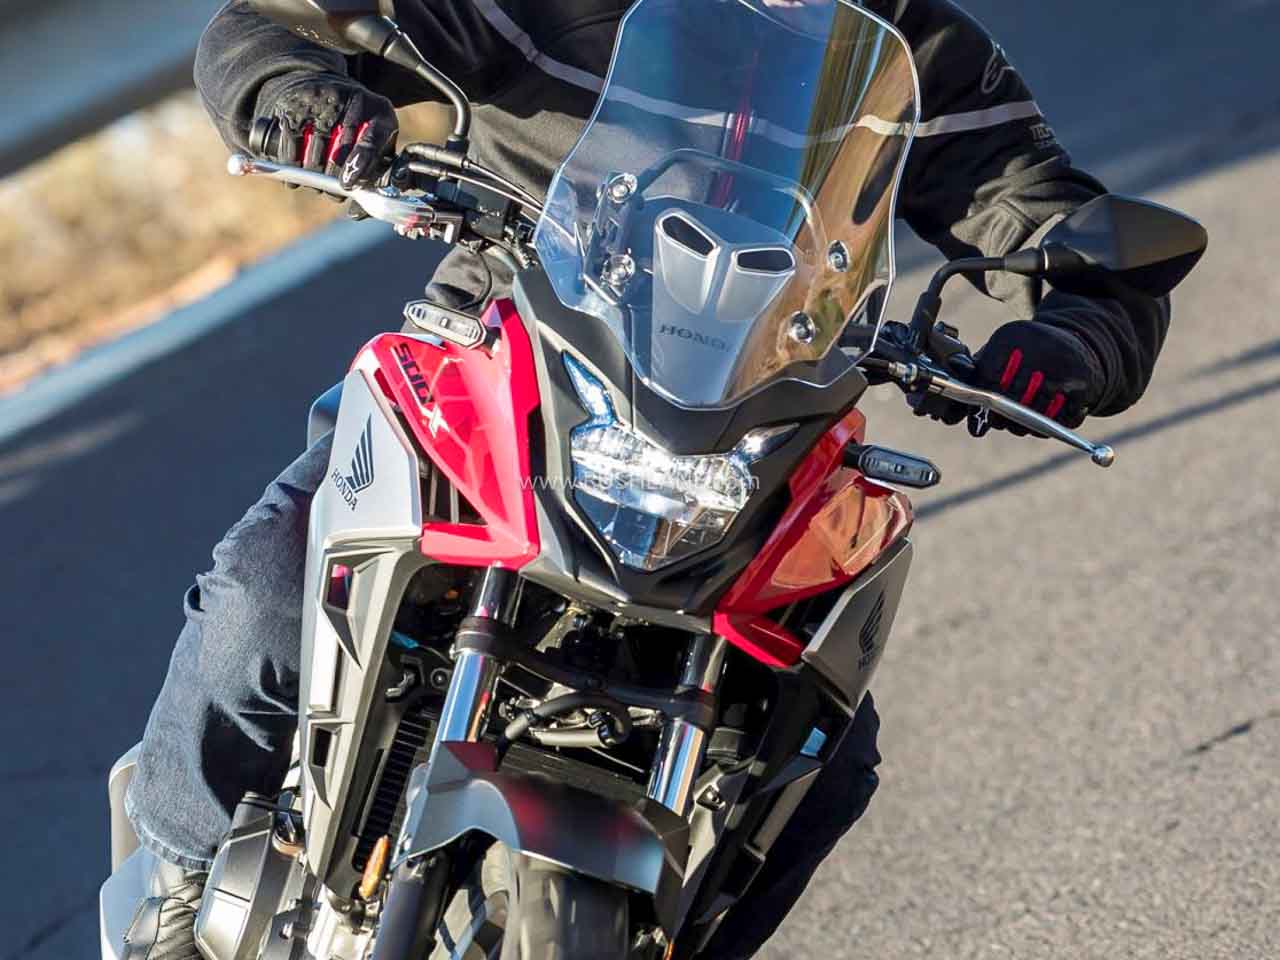 Honda CB500X India Launch Price Rs 6.87 L - As A CKD